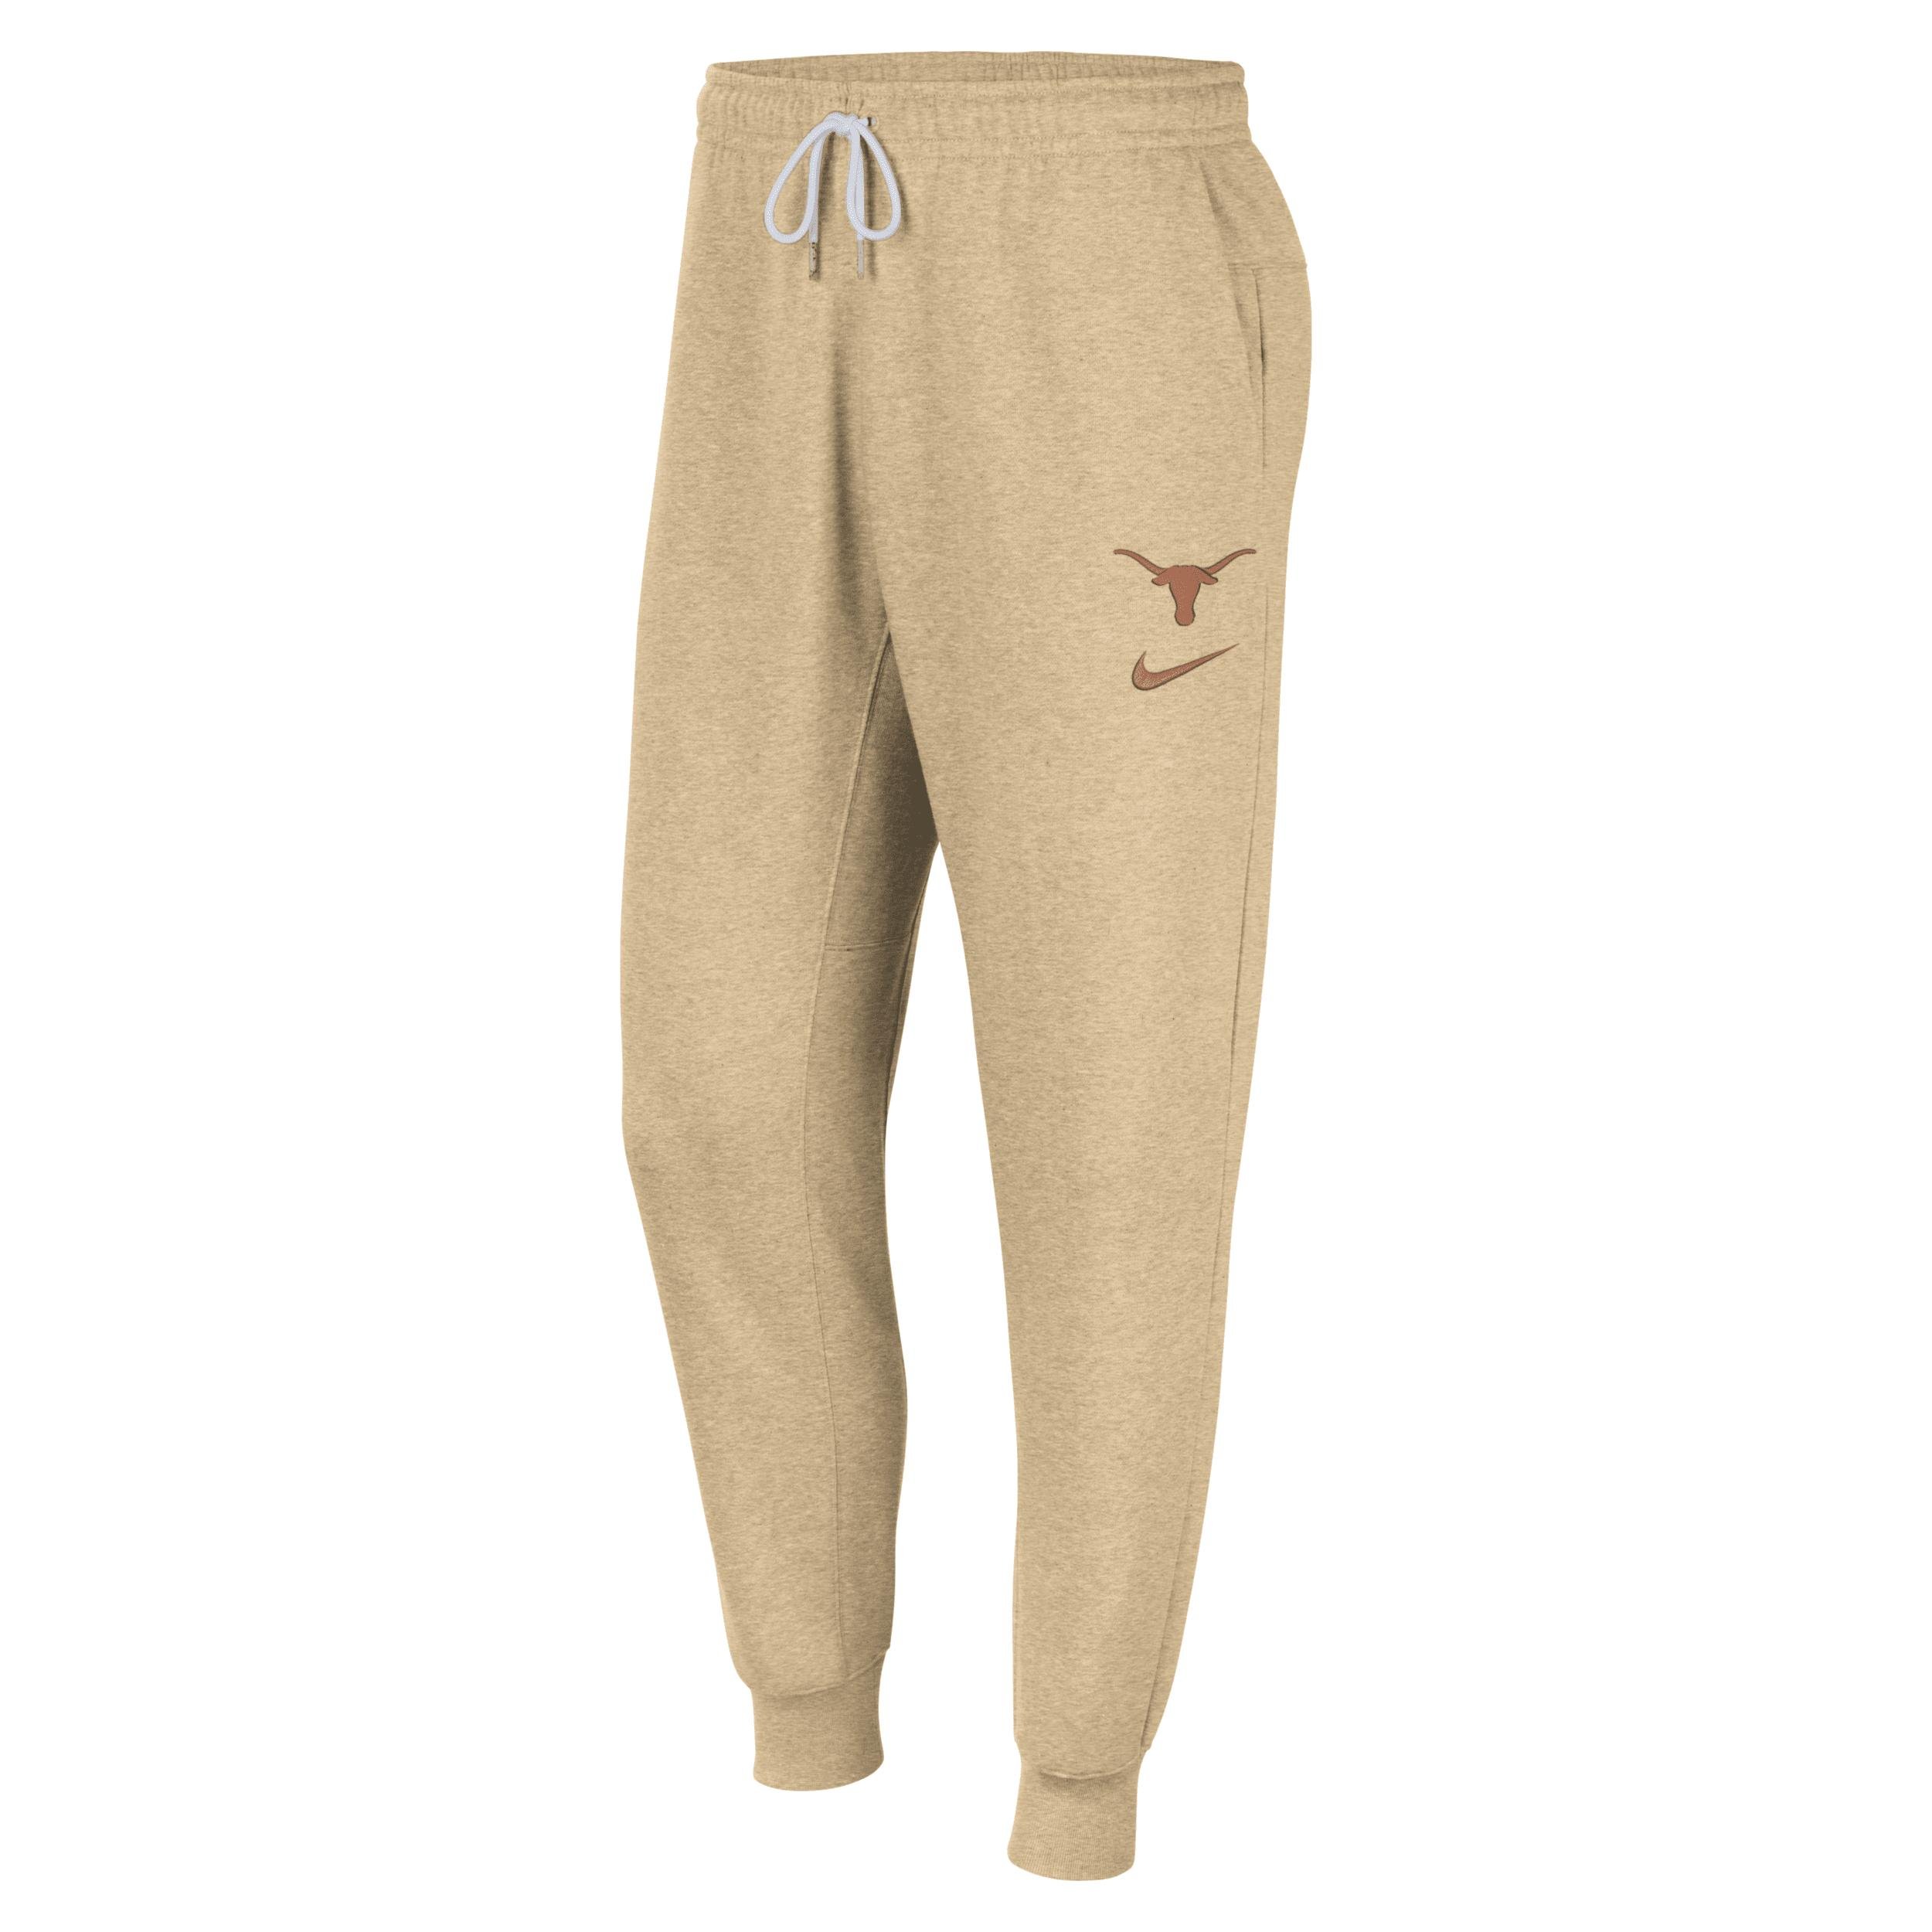 Texas Sport Essentials+ Revival Nike Men's College Jogger Pants by NIKE